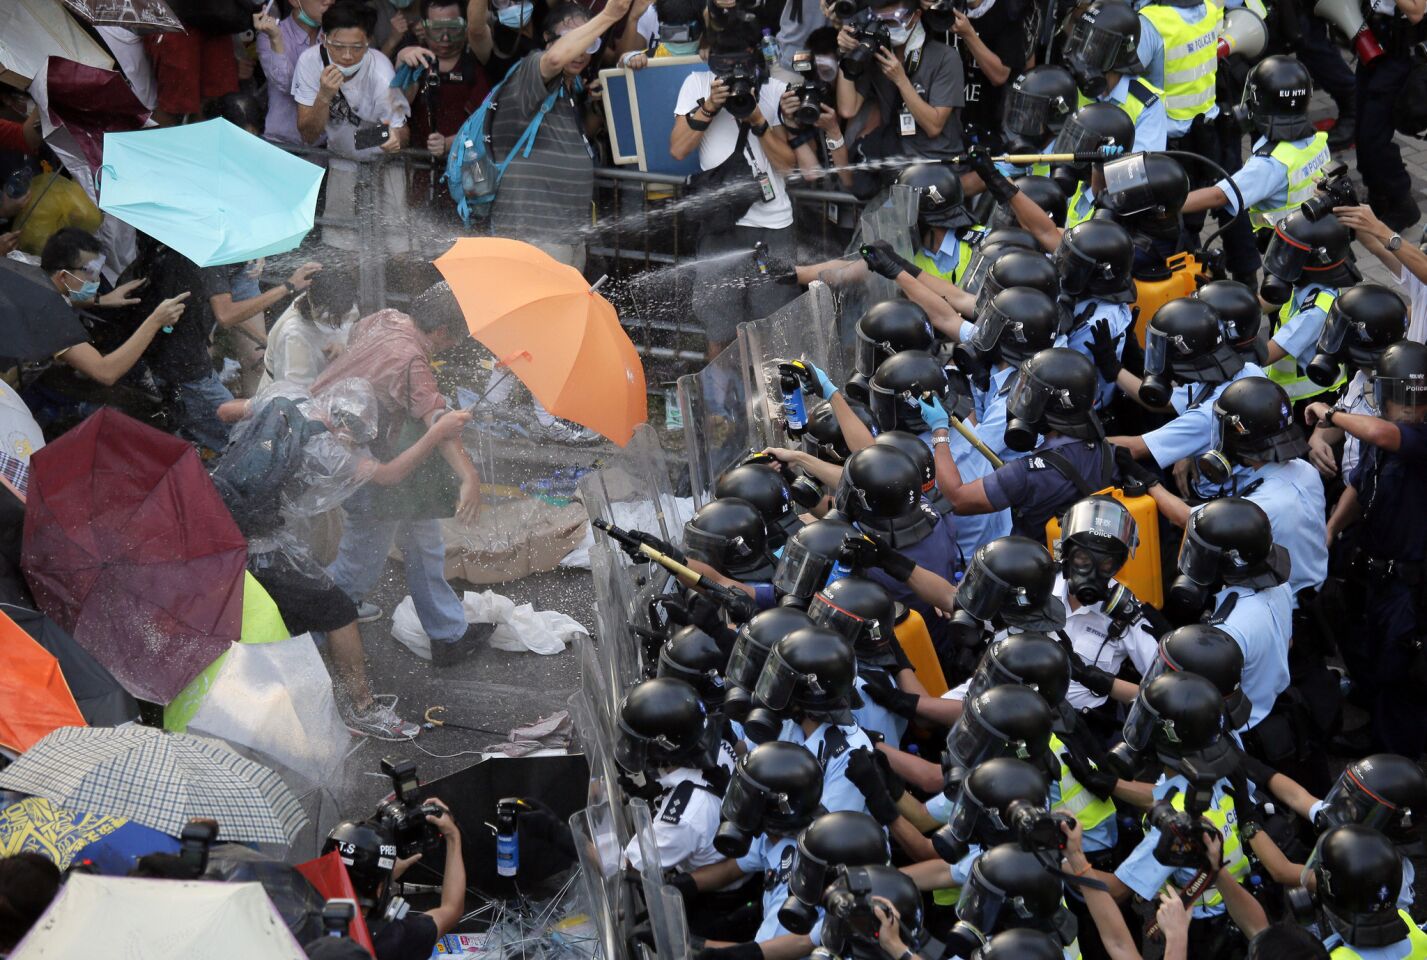 Riot police use pepper spray against protesters after thousands of people blocked a main road to the financial central district in Hong Kong on Sept. 28.